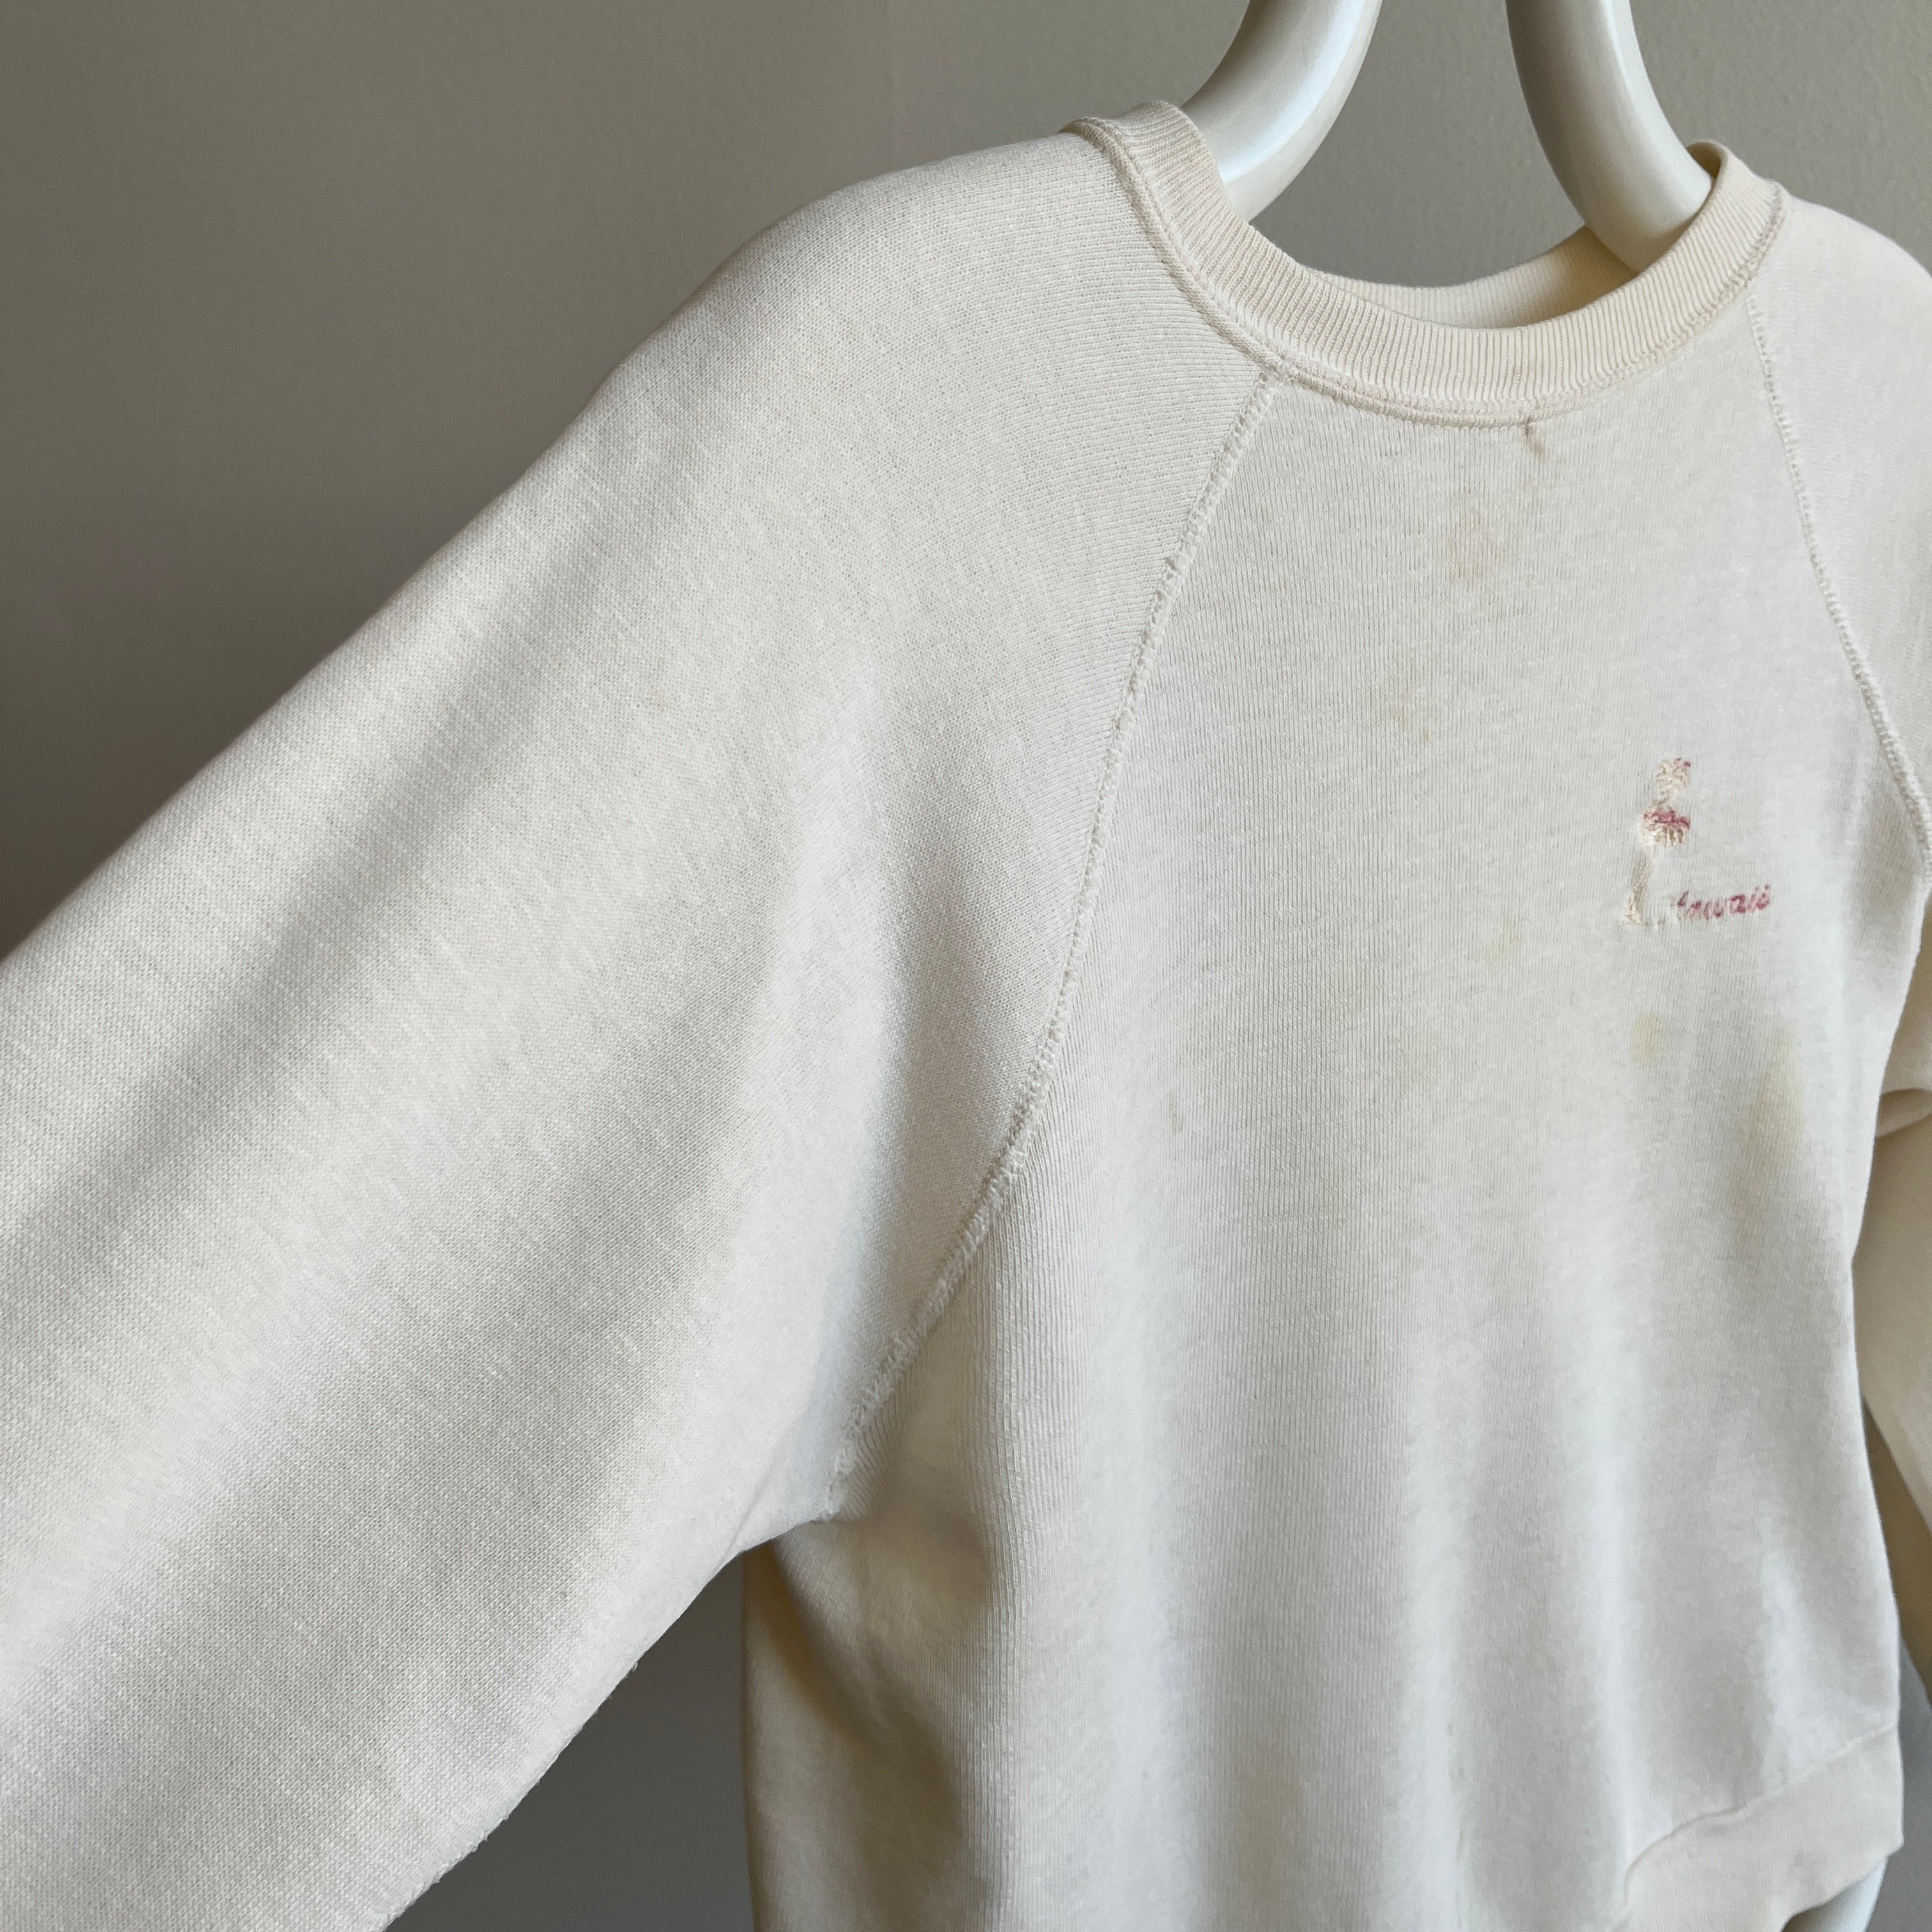 1970s Dumpster Chic - And I Mean Chic - Hawaii Smaller Super Stained and Rad Sweatshirt